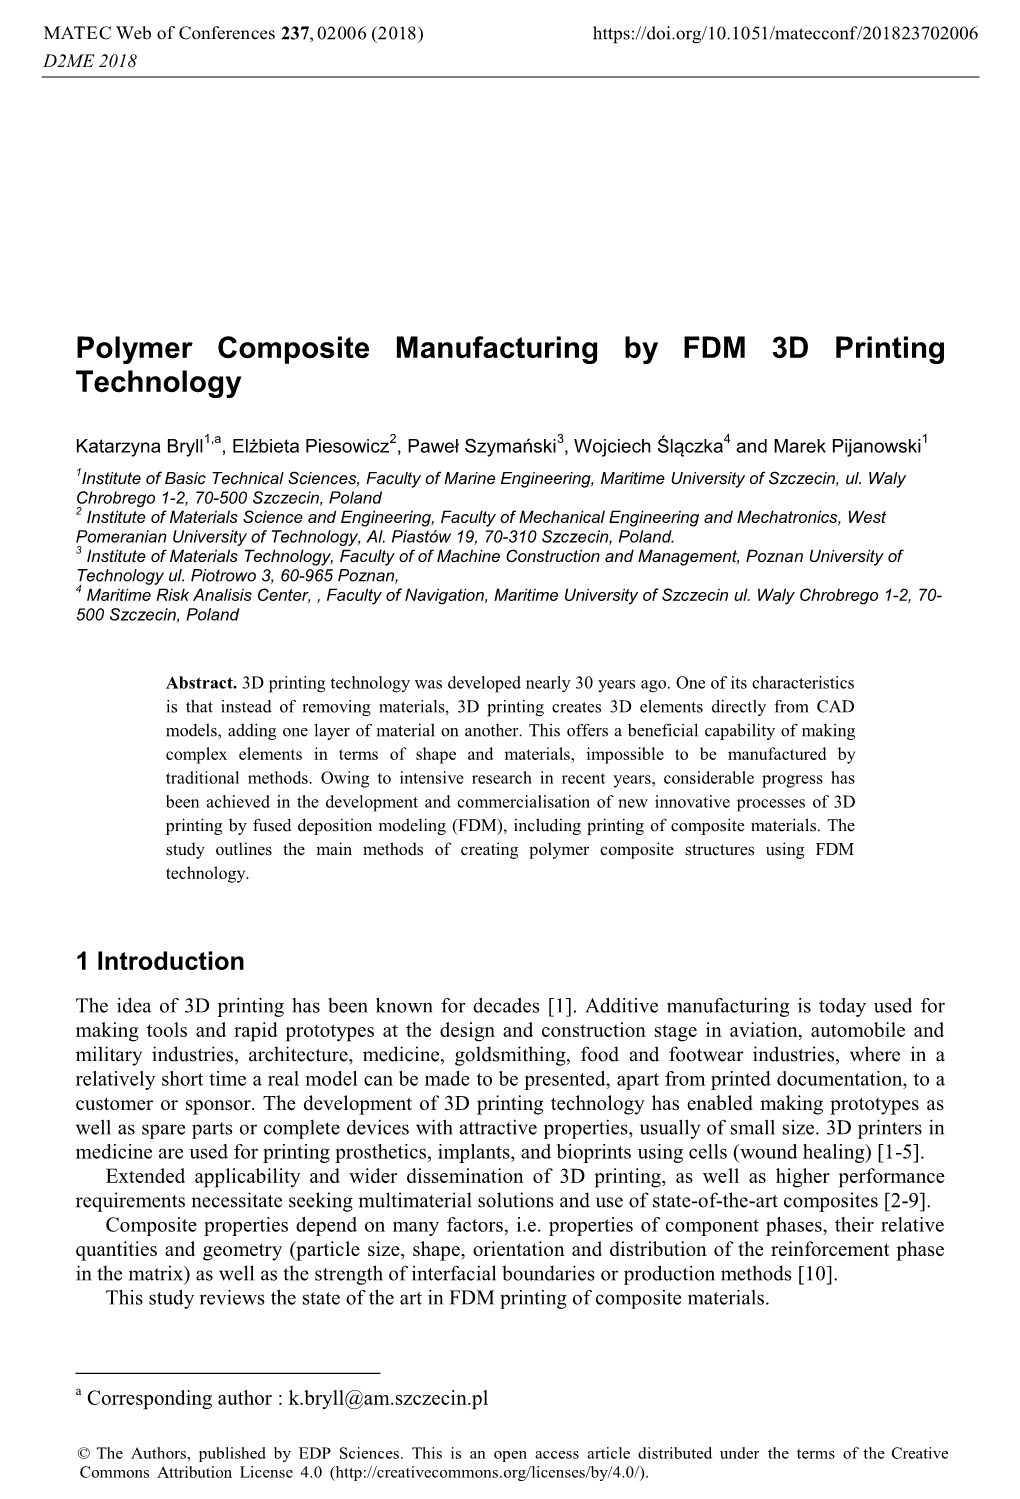 Polymer Composite Manufacturing by FDM 3D Printing Technology